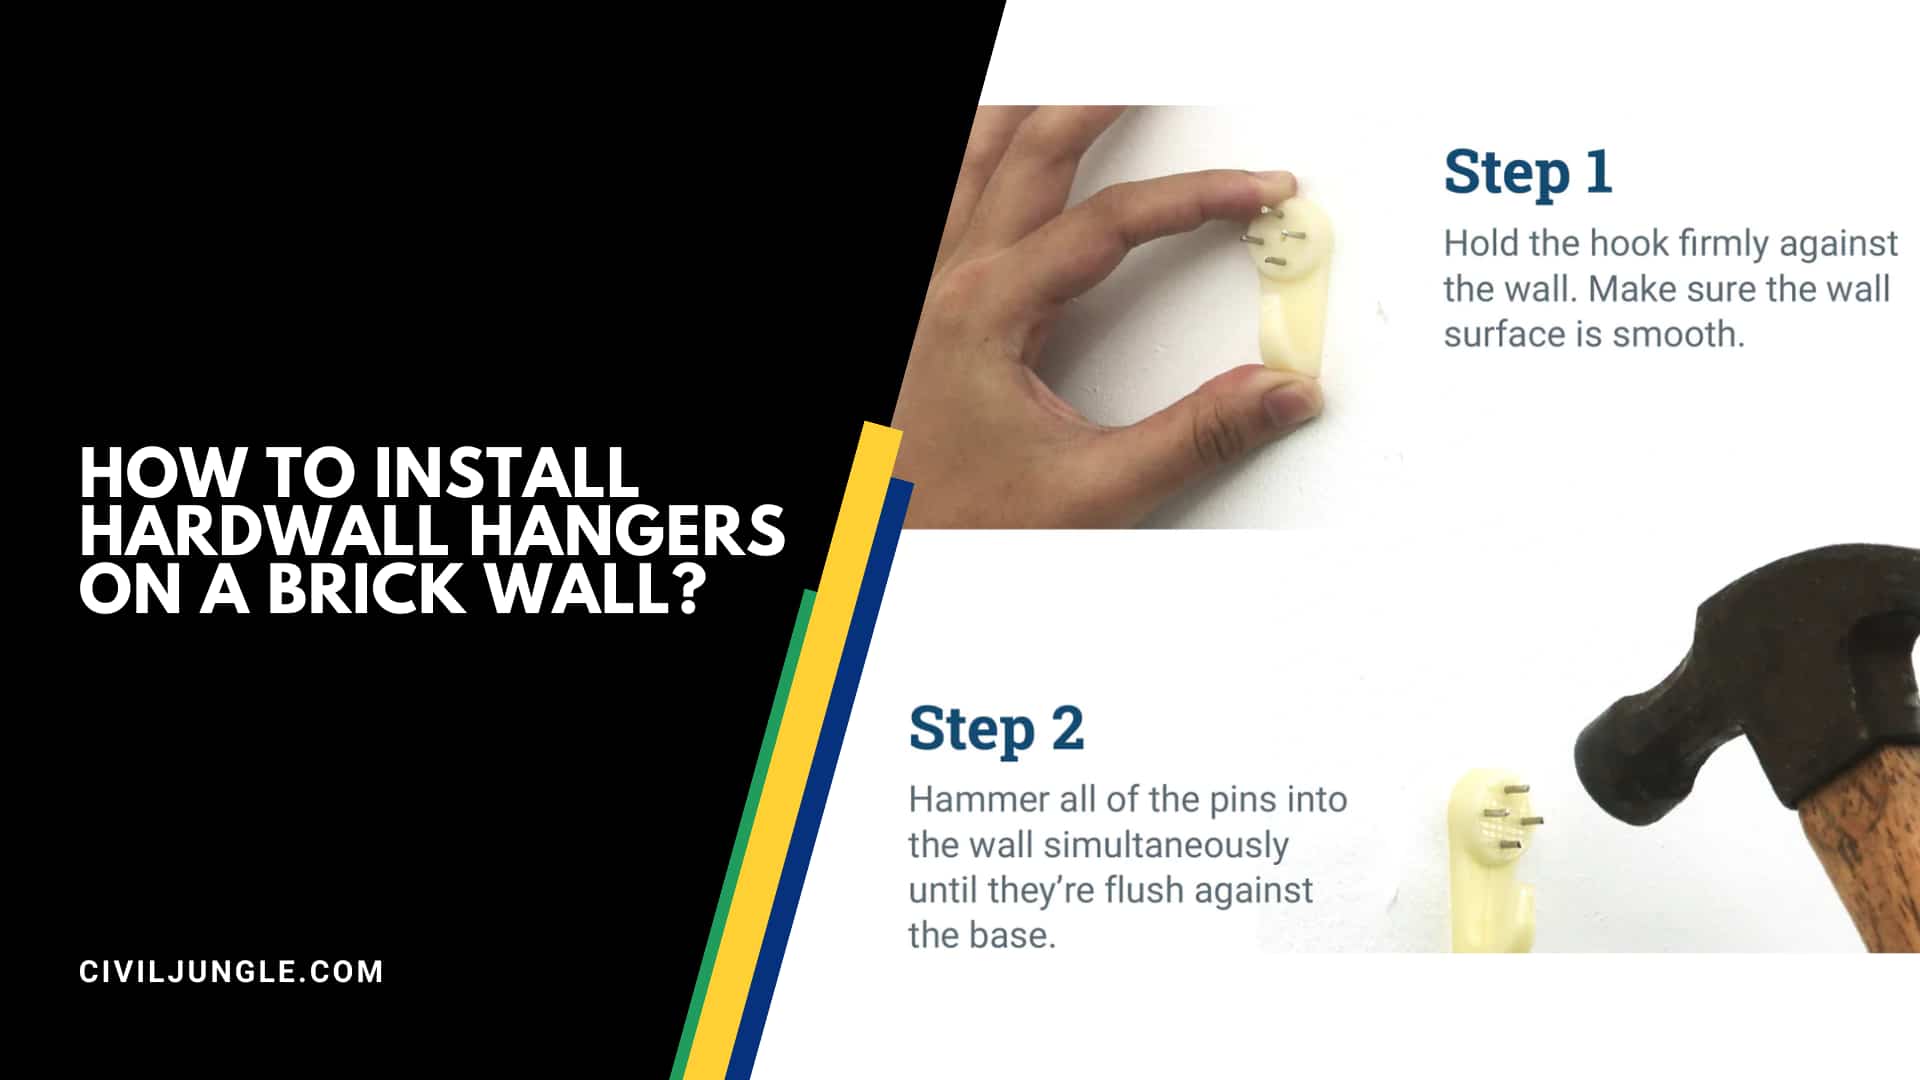 How to Install Hardwall Hangers on a Brick Wall?